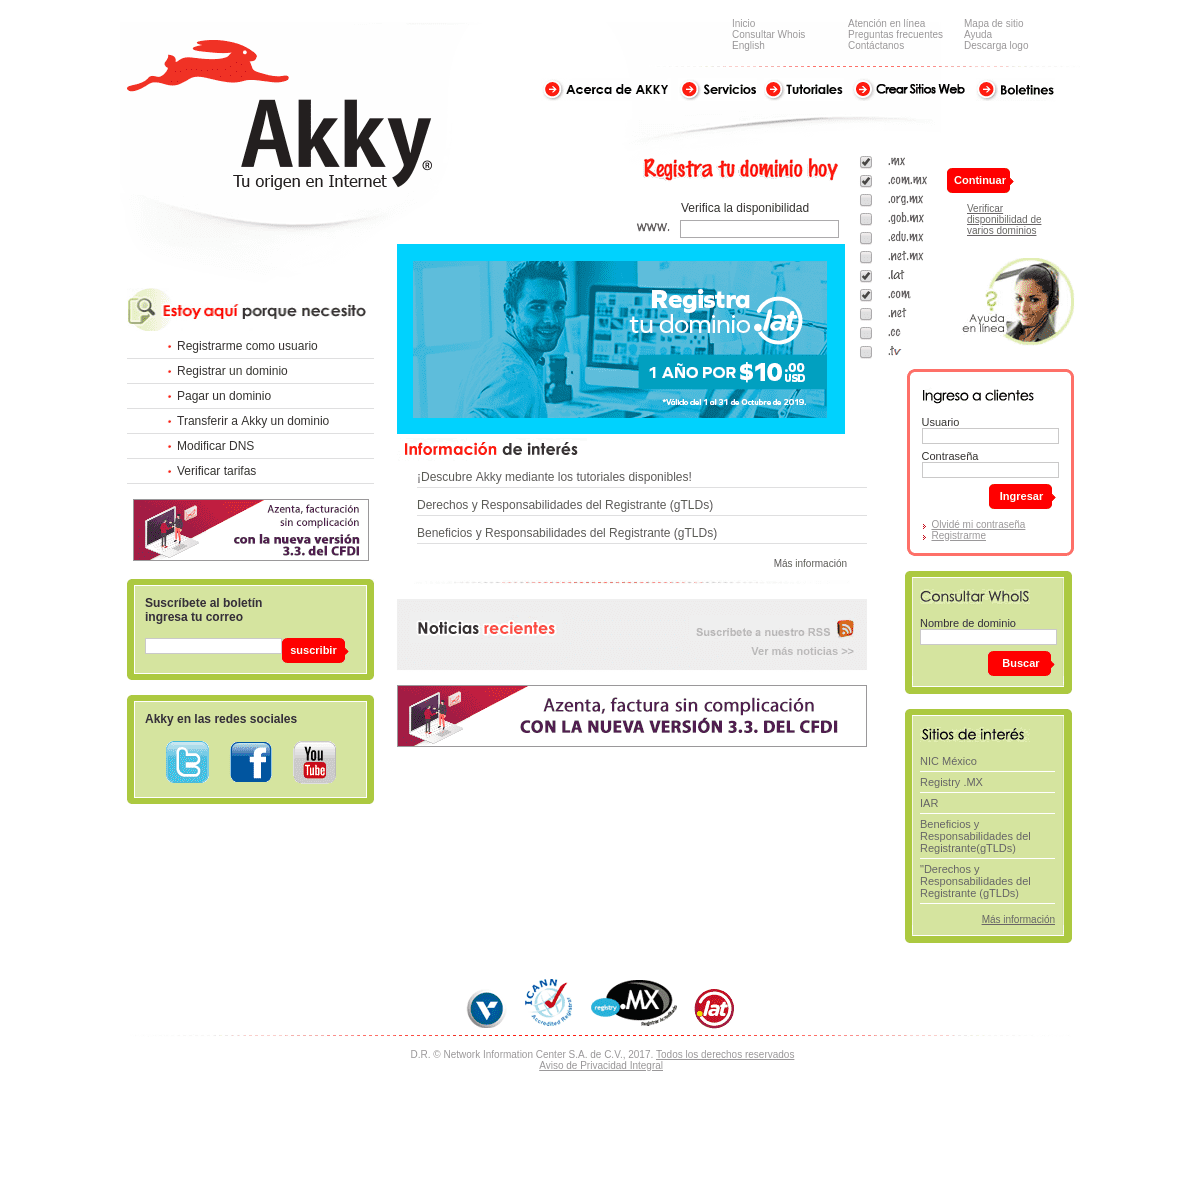 A complete backup of akky.mx